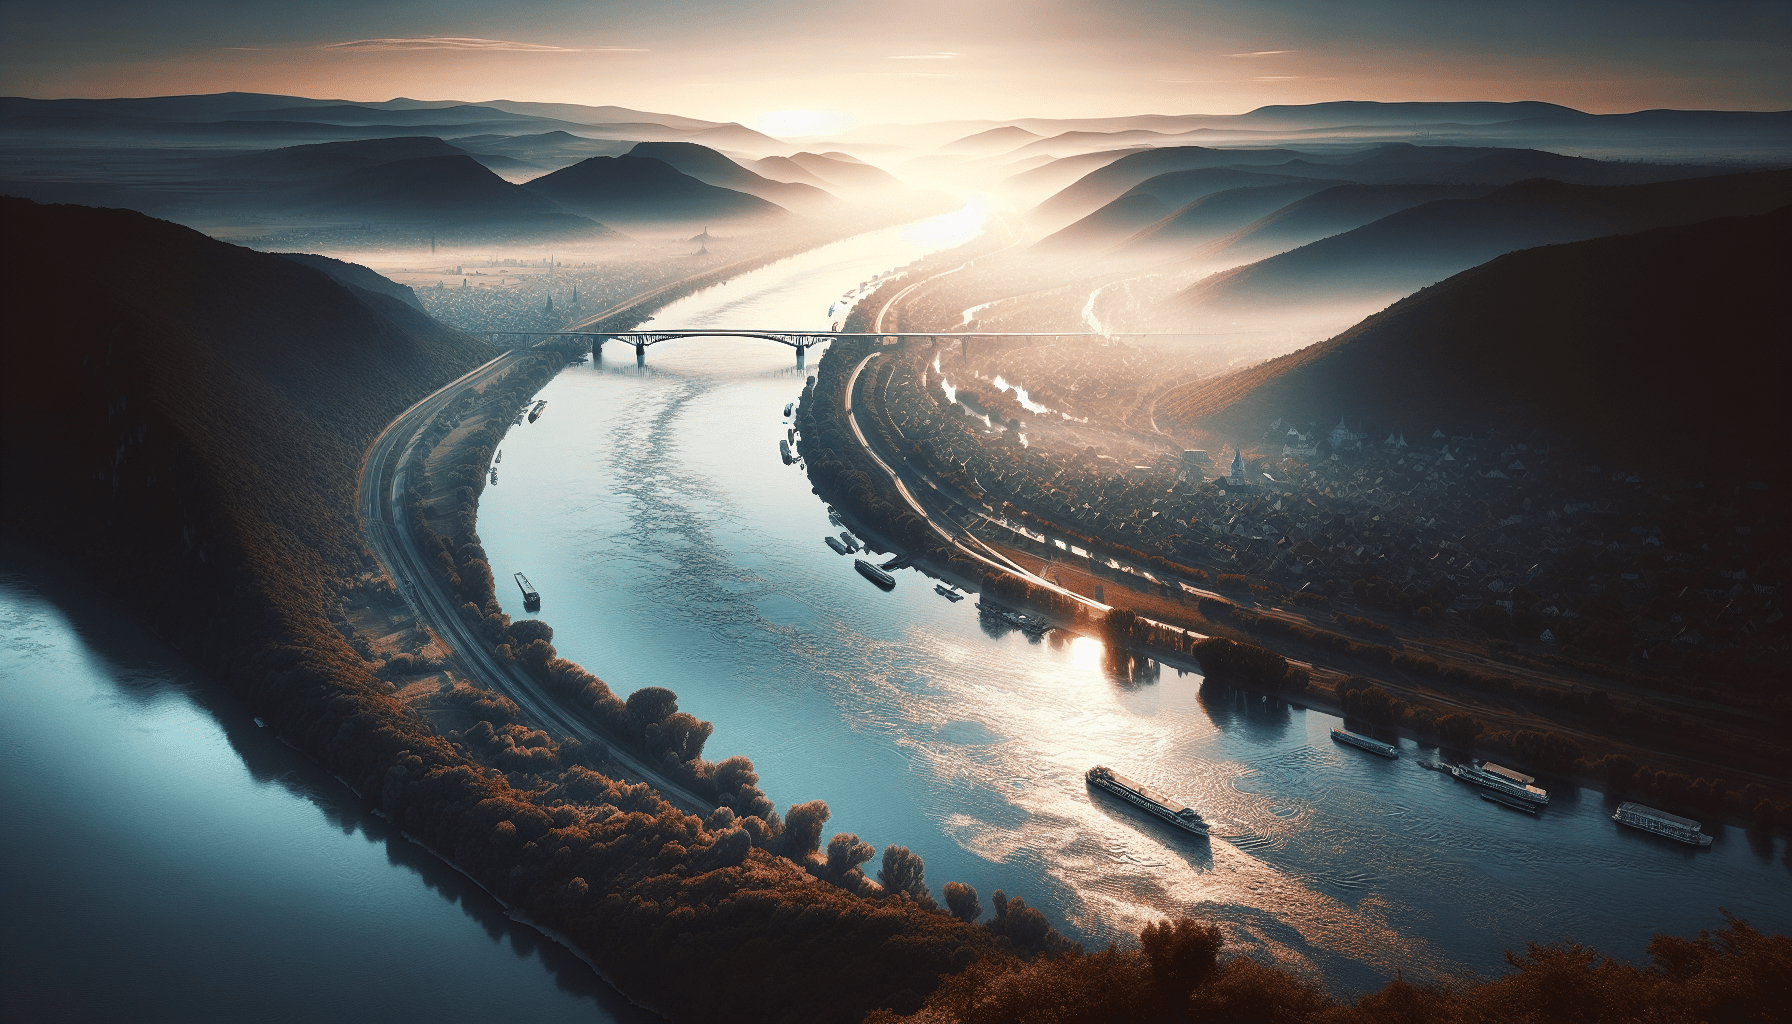 What Is Famous About The Danube River?